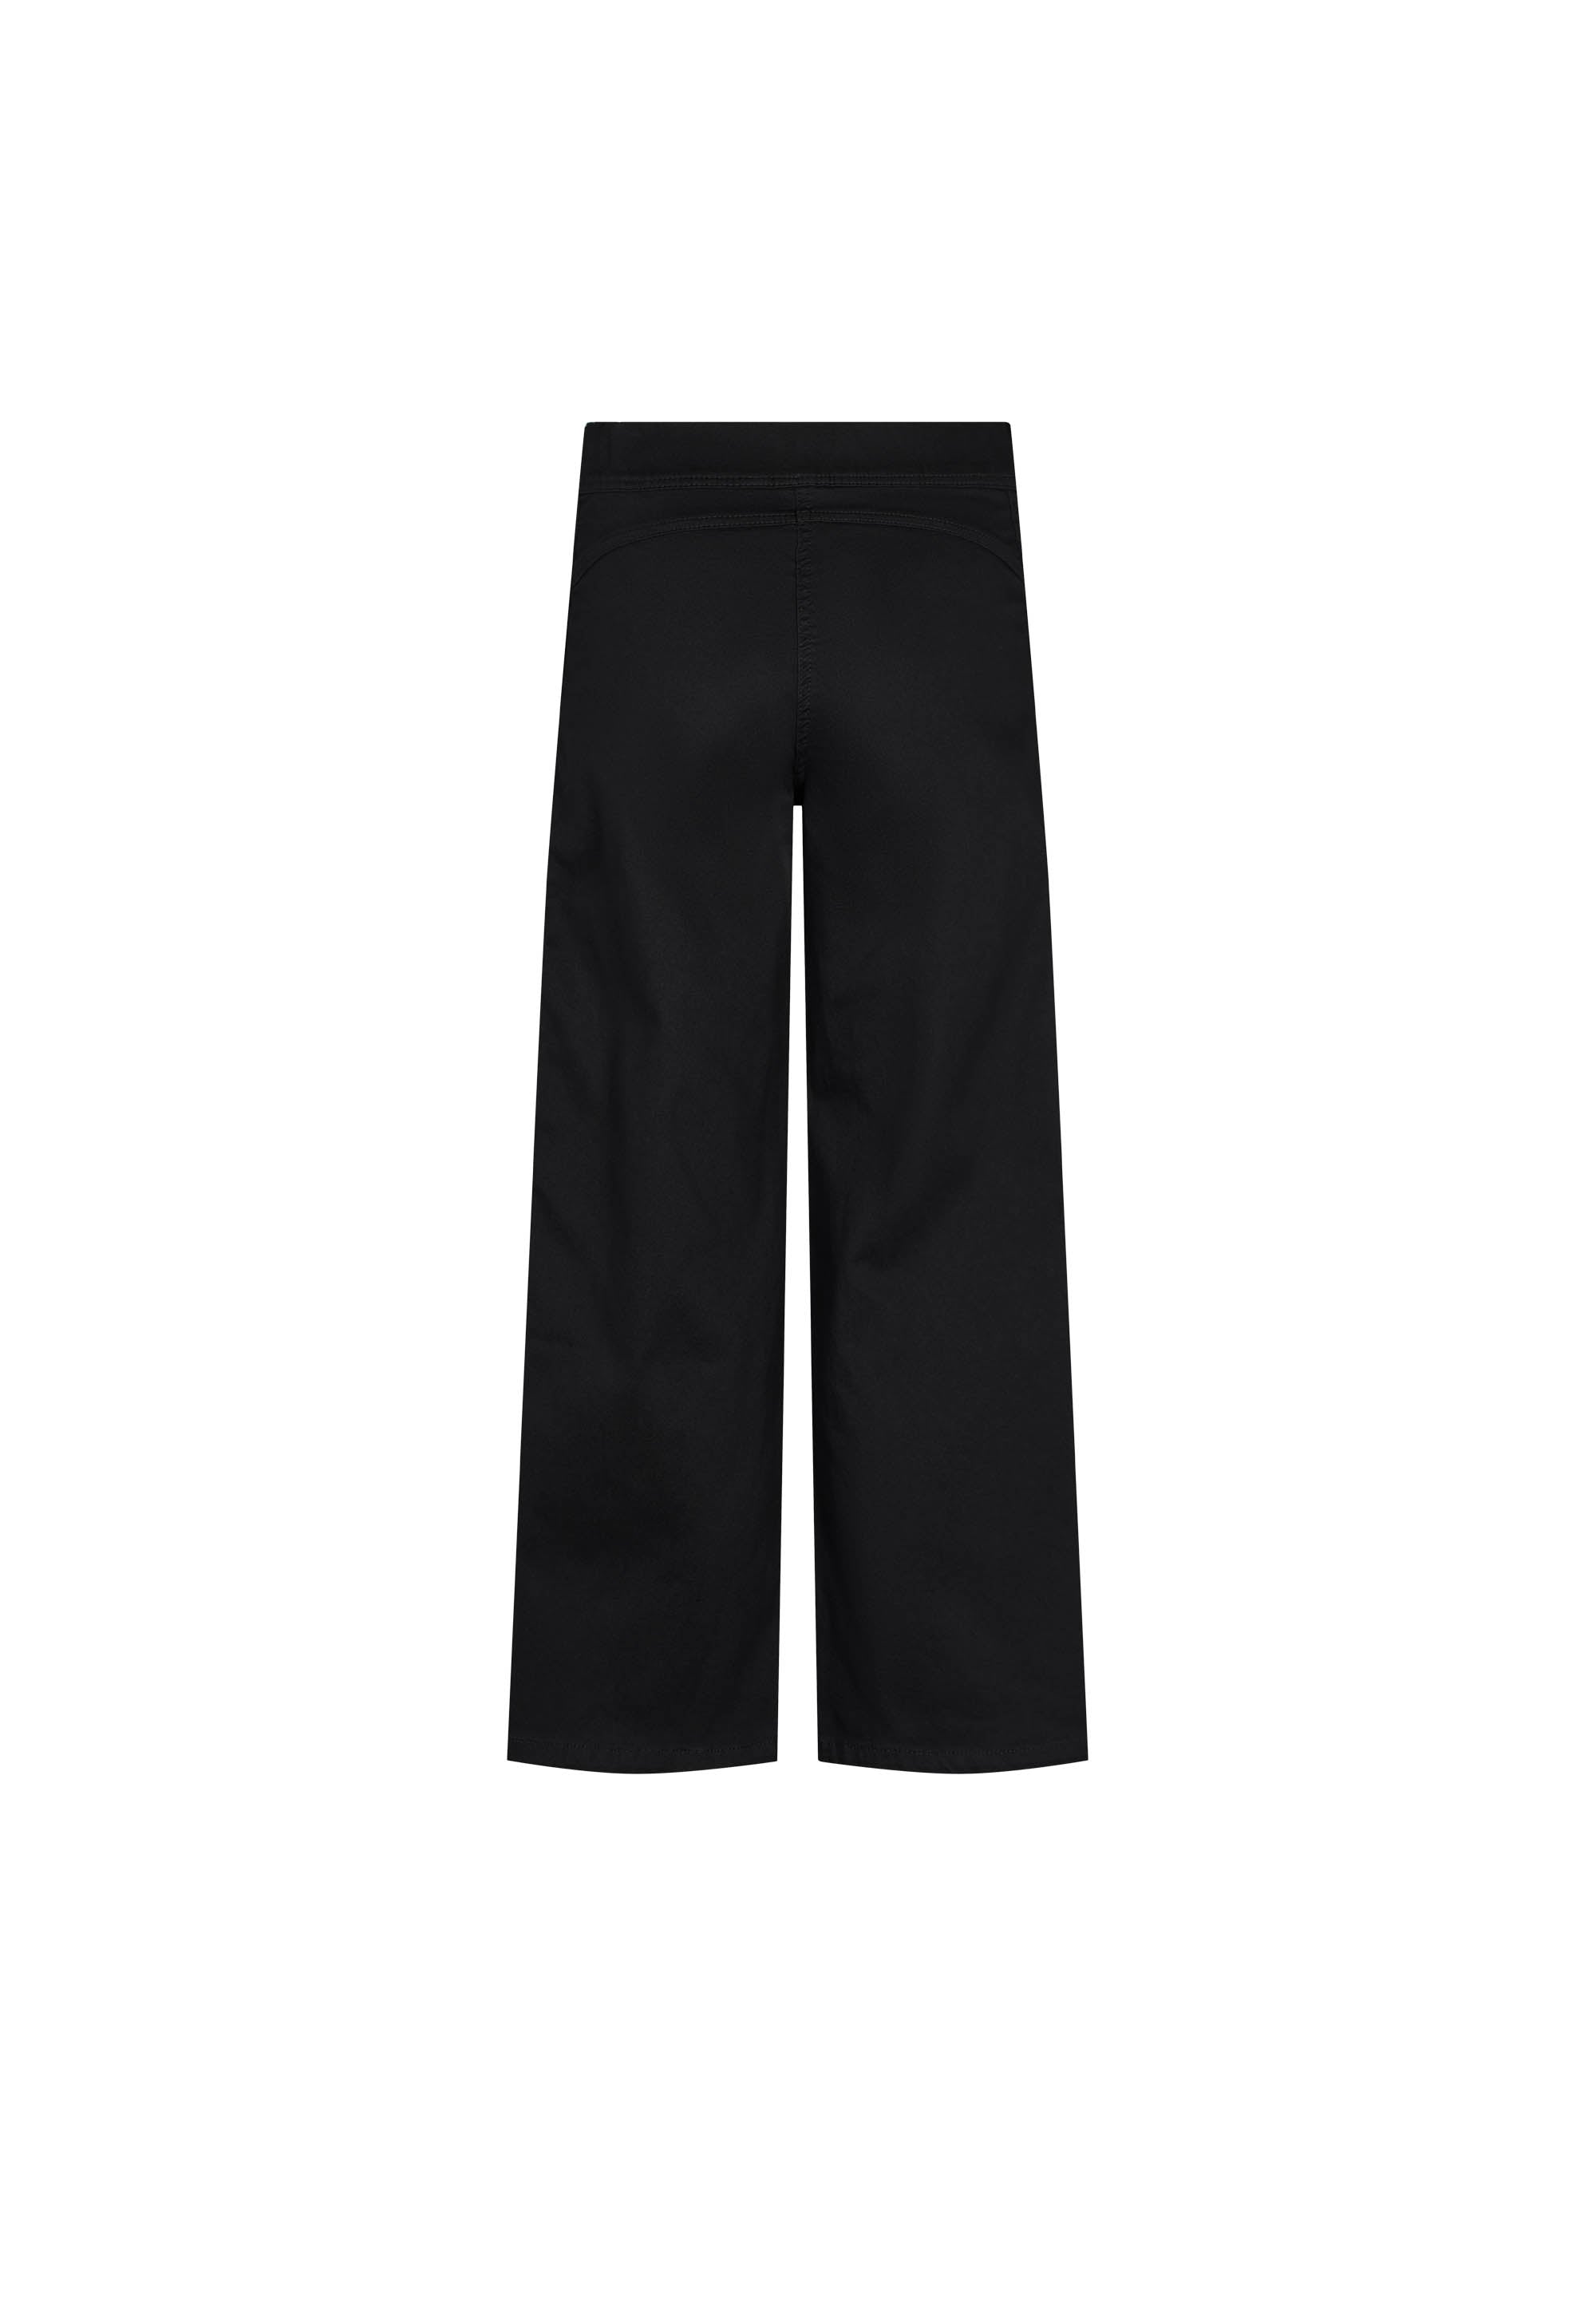 LAURIE Serene Loose - Extra Short Length Trousers LOOSE 99000 Black